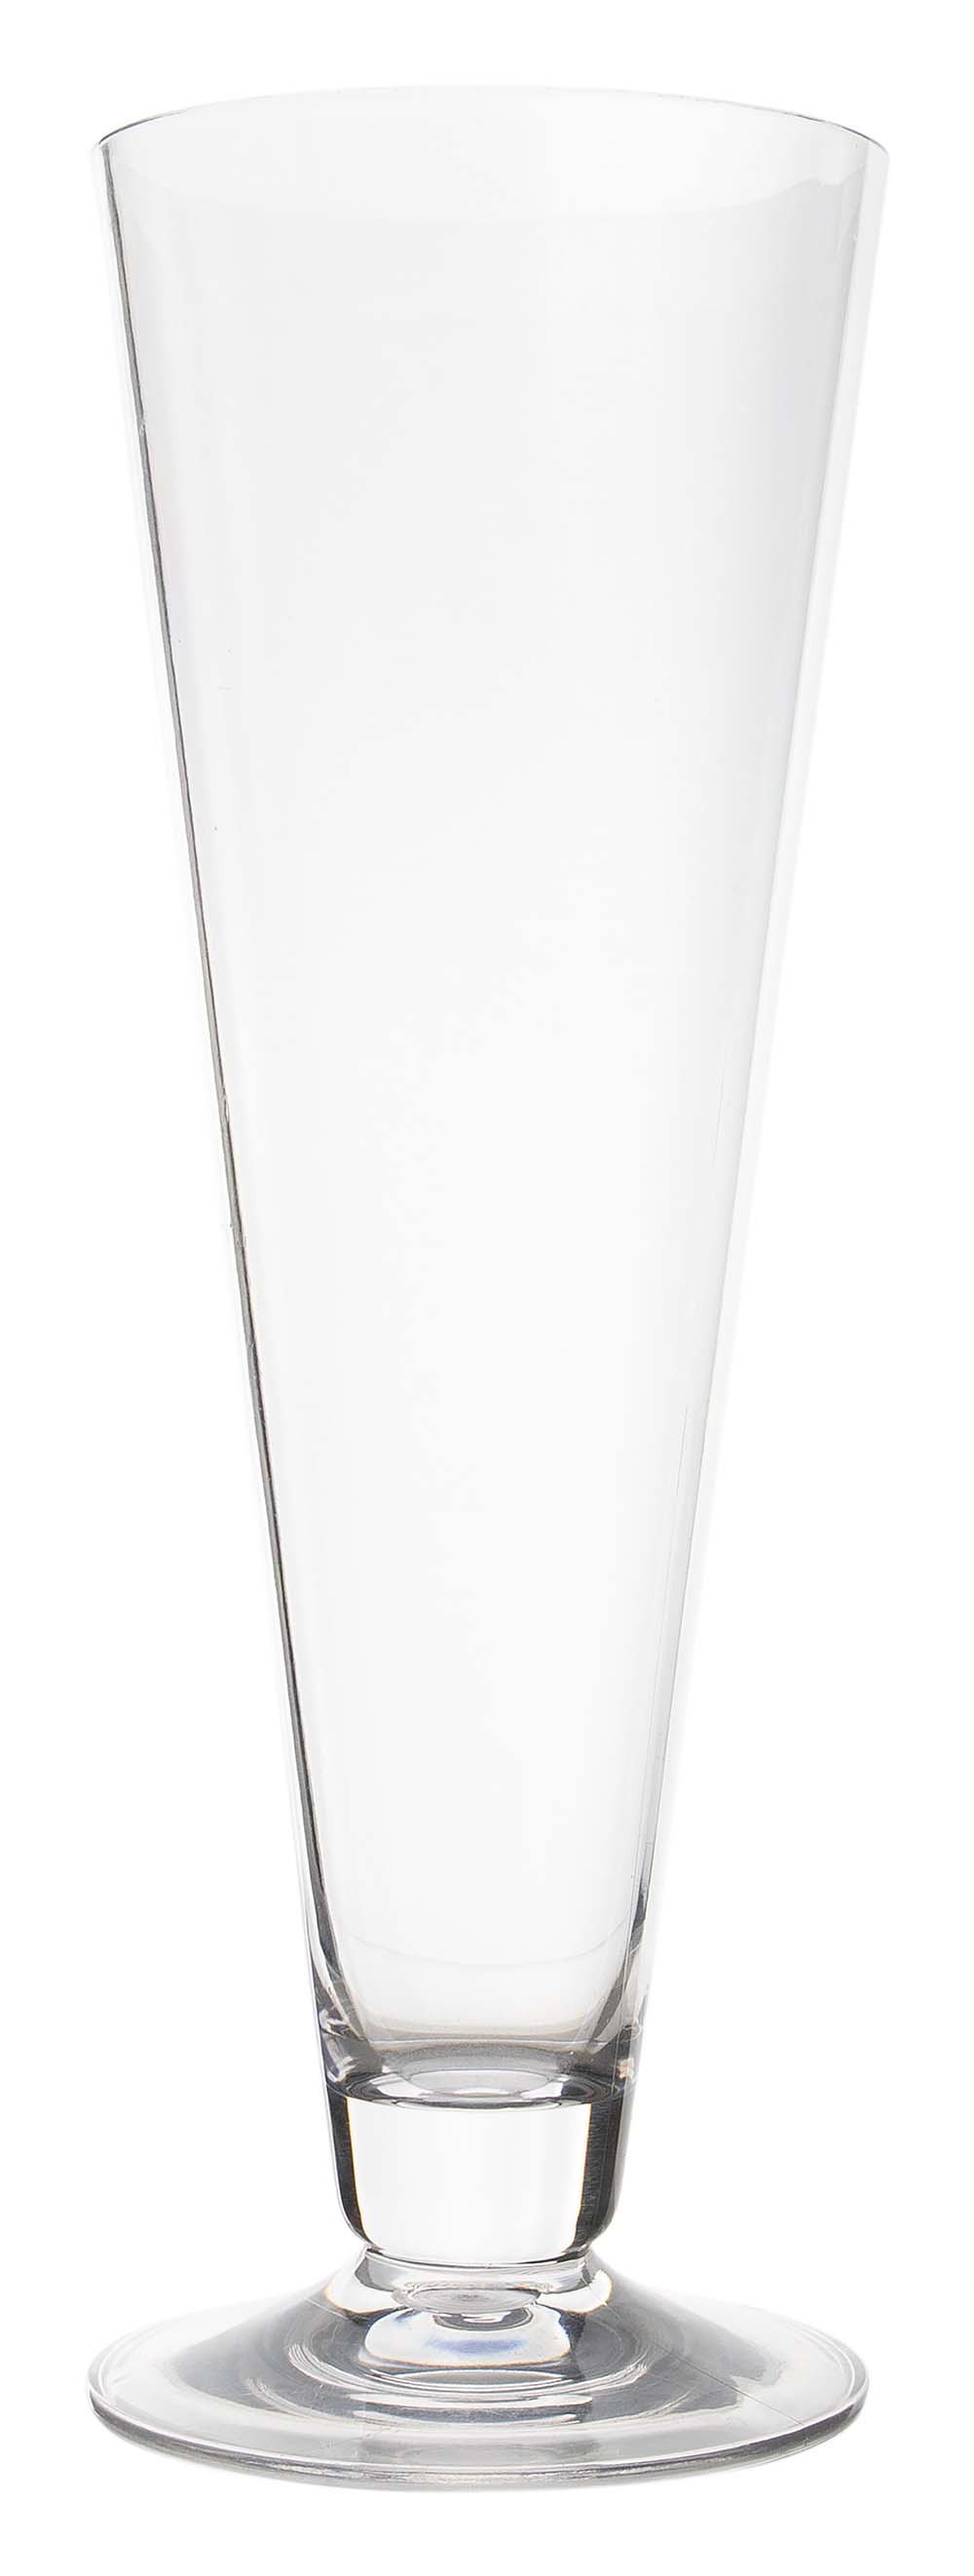 6911160 A beer glass from the Royal line collection. Virtually unbreakable due to high quality MS material. Consists of a set of 2 pieces. Very easy to clean and long lasting, which makes the glass very durable. In addition, the beer glass is lightweight and scratch resistant. Capacity: 450 ml.